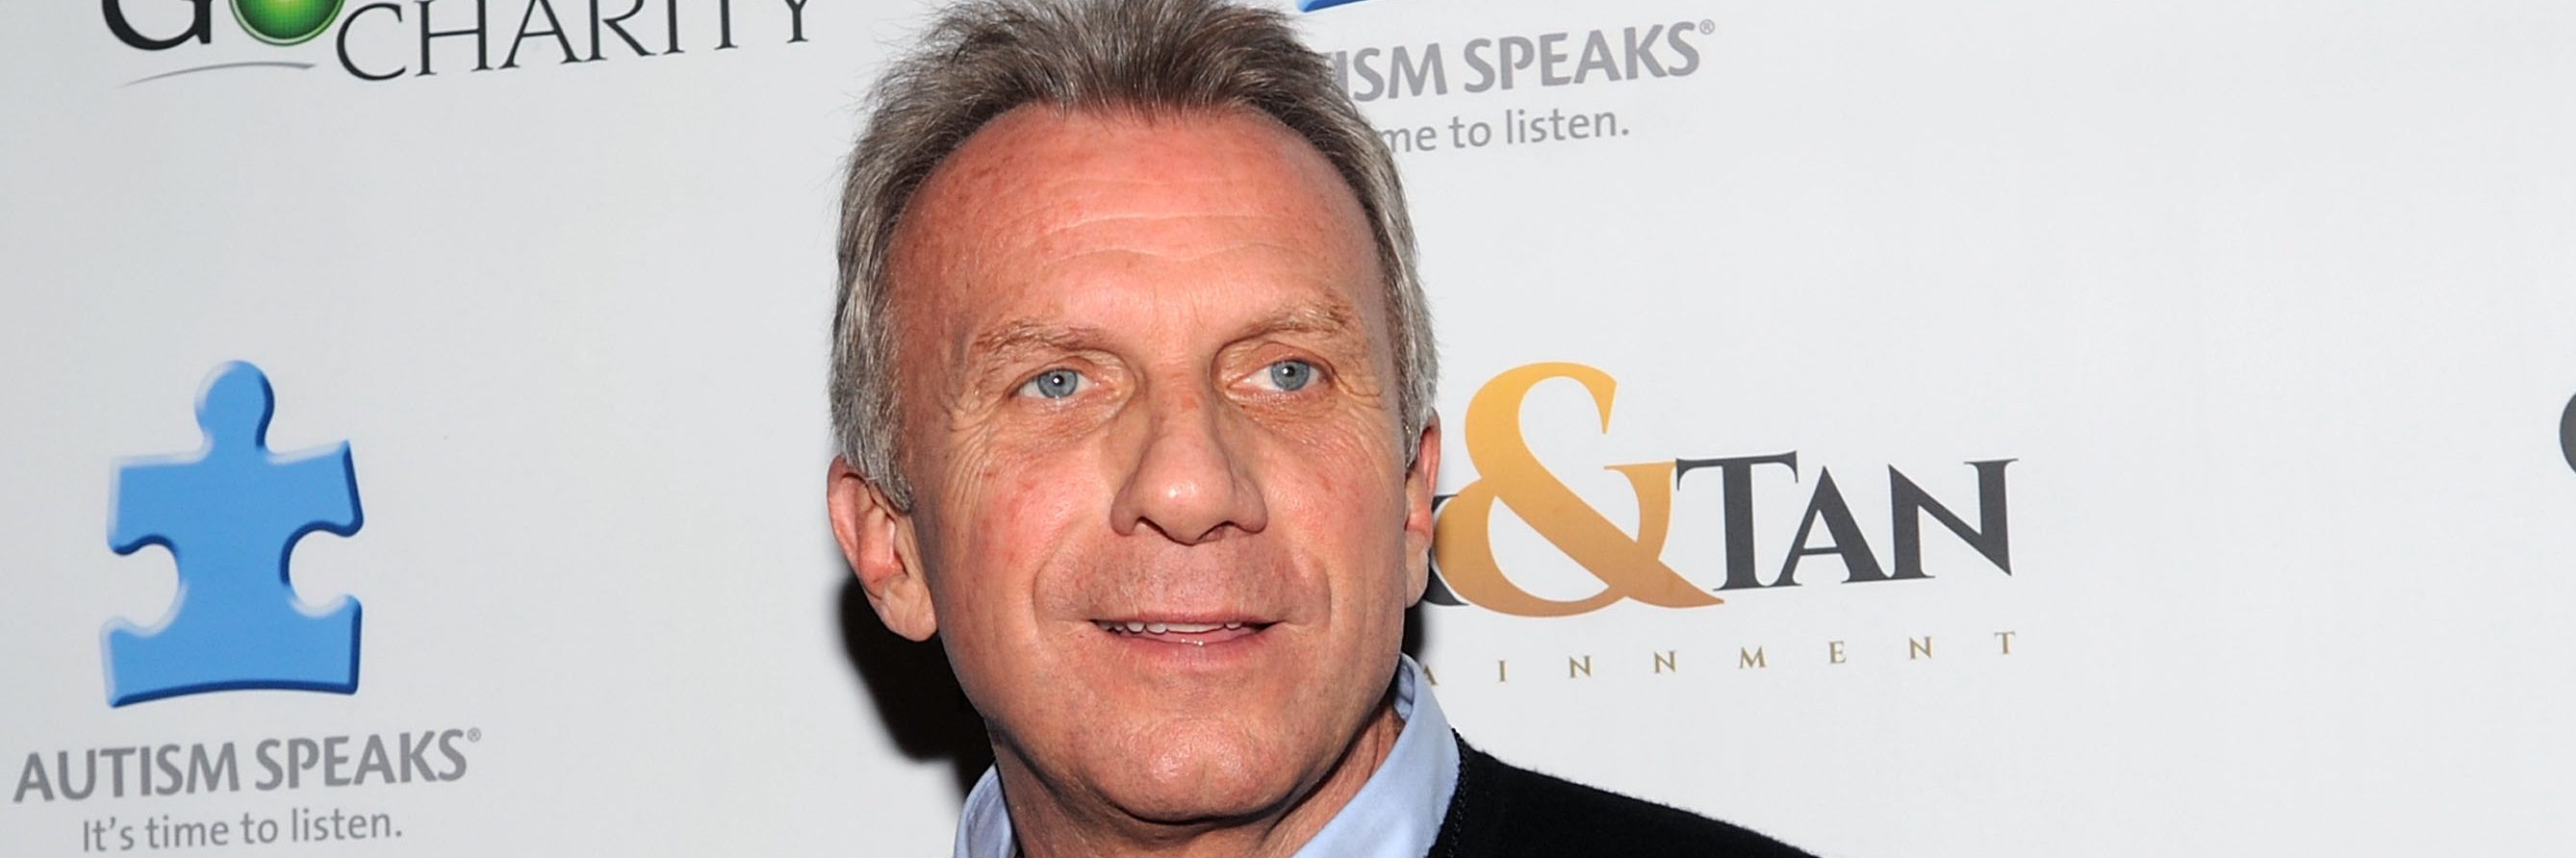 Joe Montana attends The Catch Game Day Experience at The Edison Ballroom on February 2, 2014 in New York City.  (Photo by Bobby Bank/Getty Images)